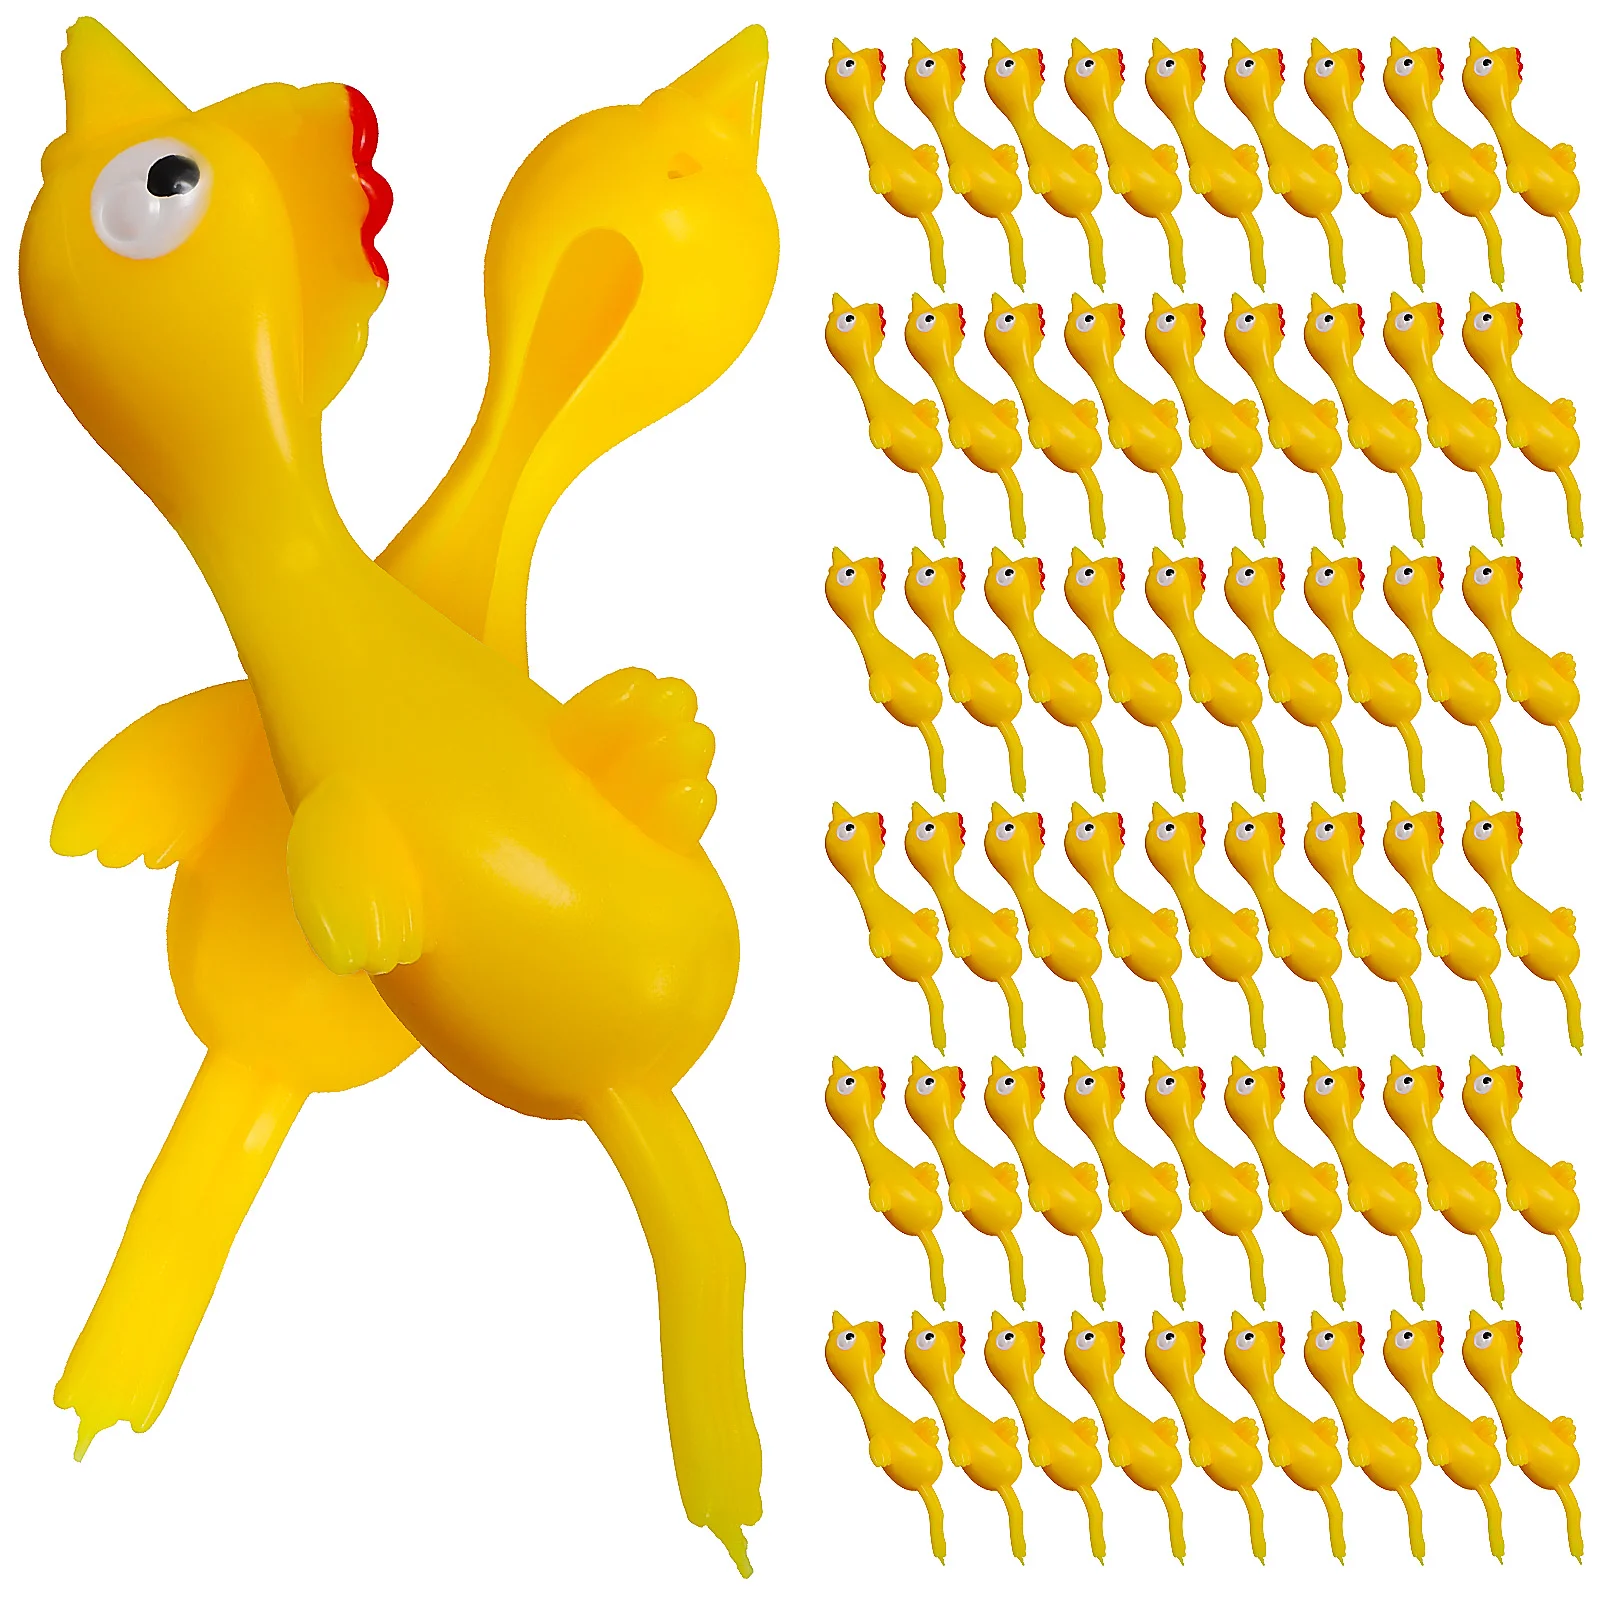 

60 Pcs Kids Toys Finger Chick Plaything Stretch Party Interactive Tpr Stretchable Chicken Child Flying Rubber Chickens